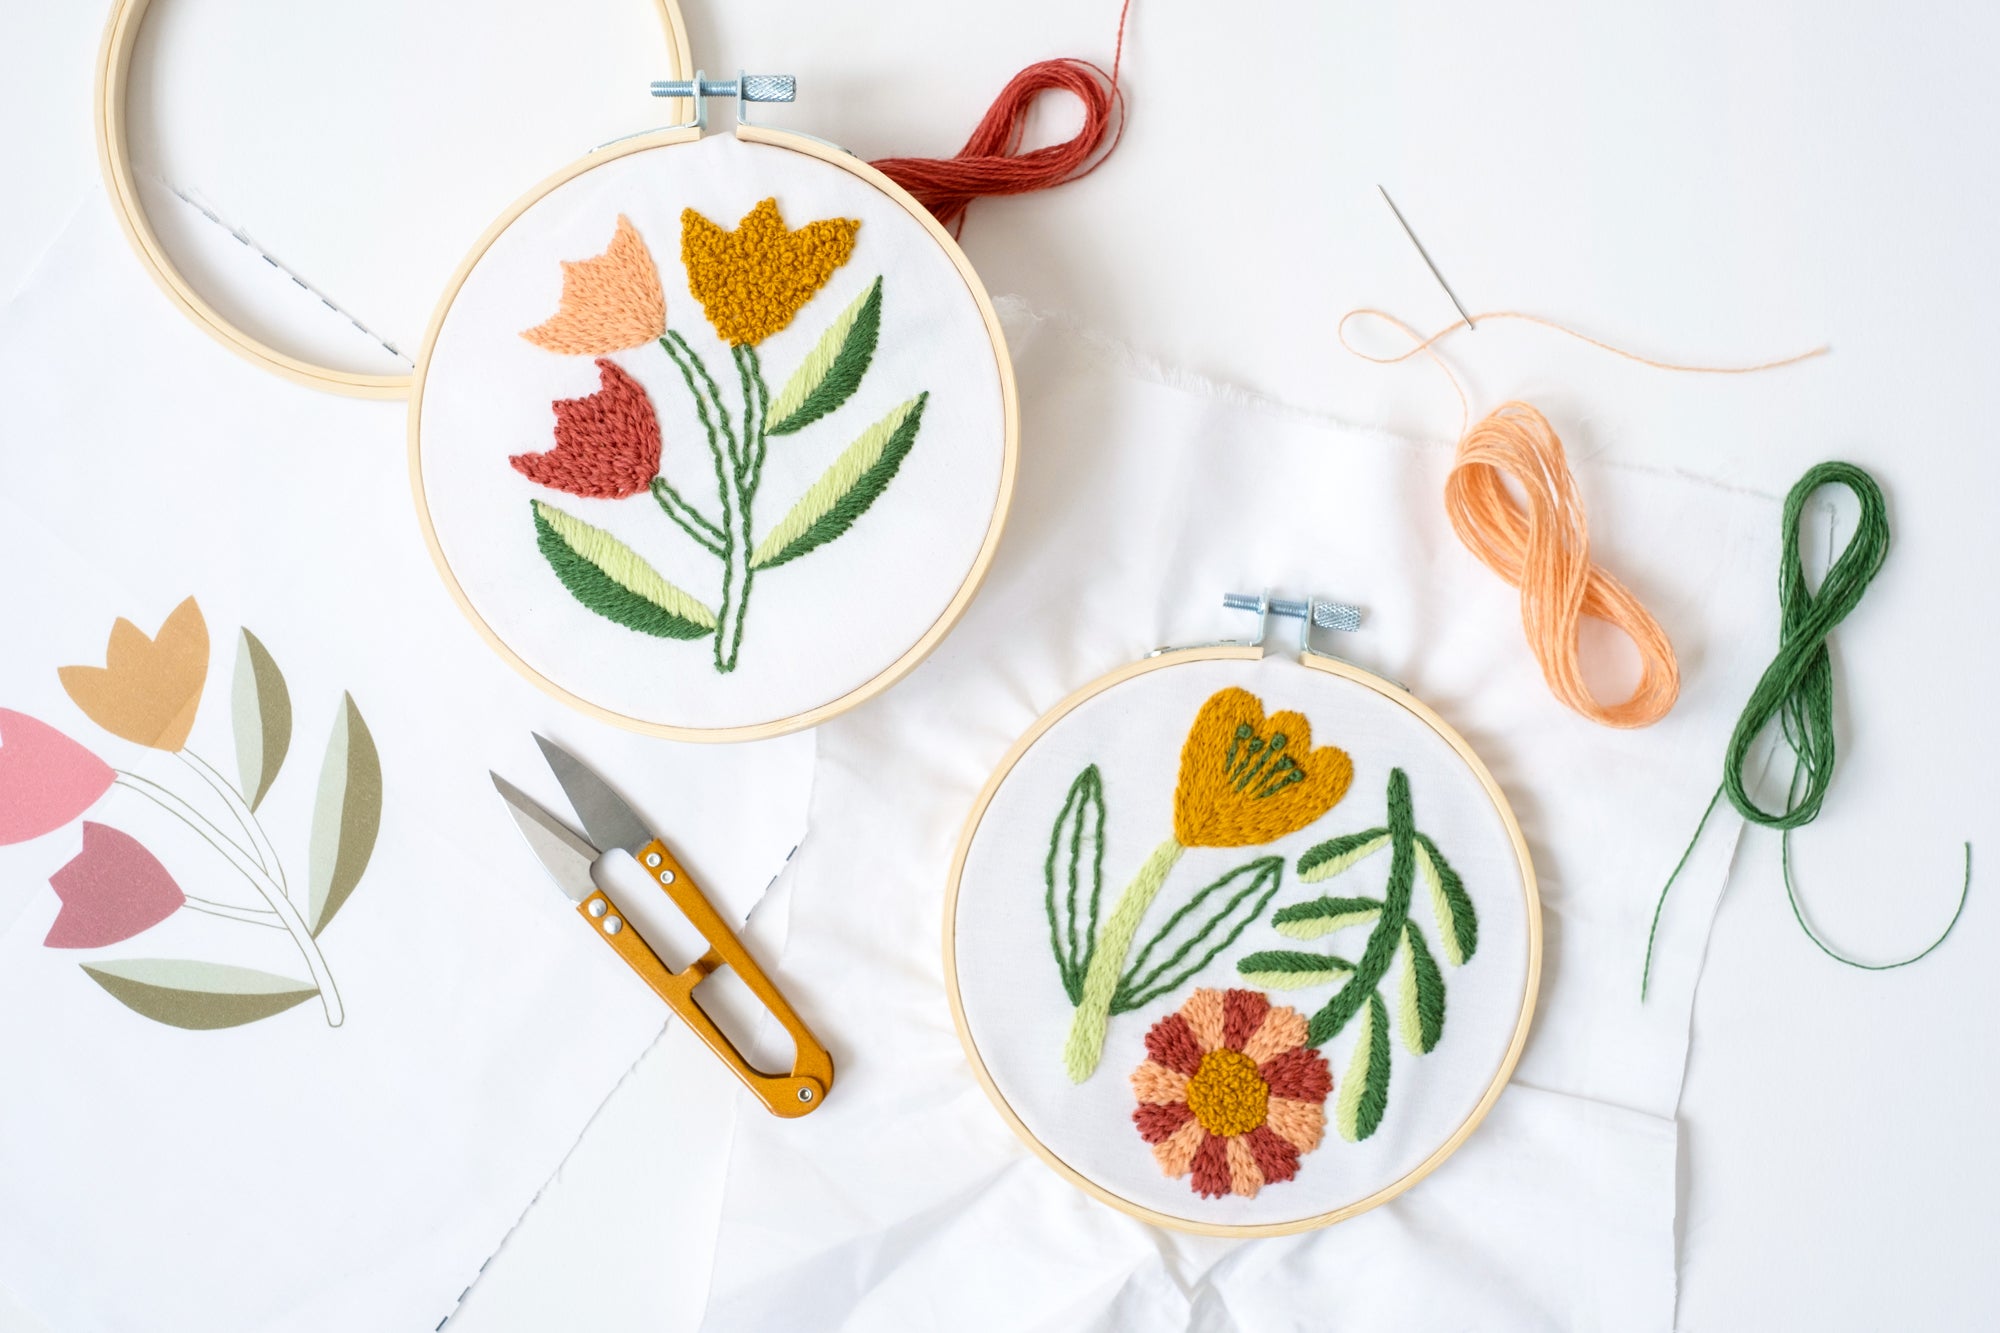 Discover Embroidery - Kit by Arounna Khounnoraj + Video Learning